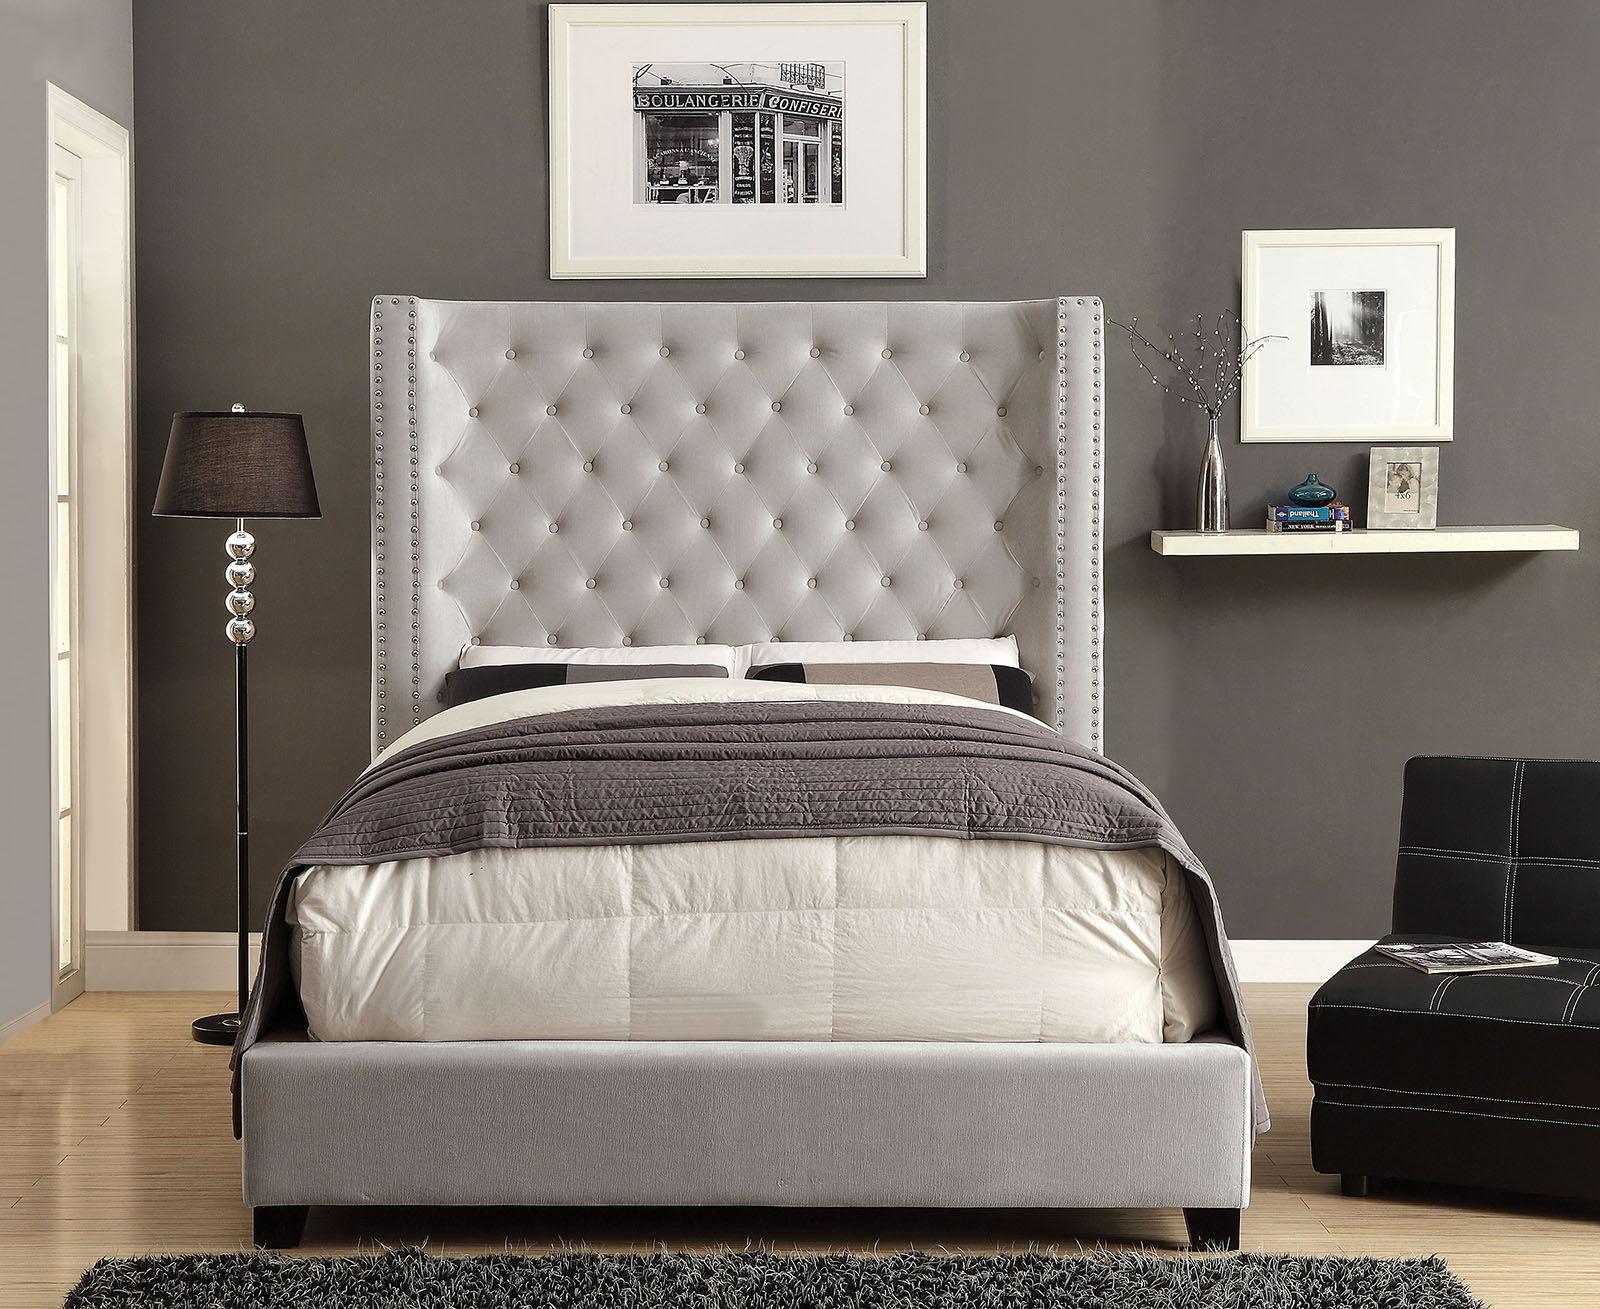 Furniture of America - Mirabelle - Queen Bed - Ivory - 5th Avenue Furniture